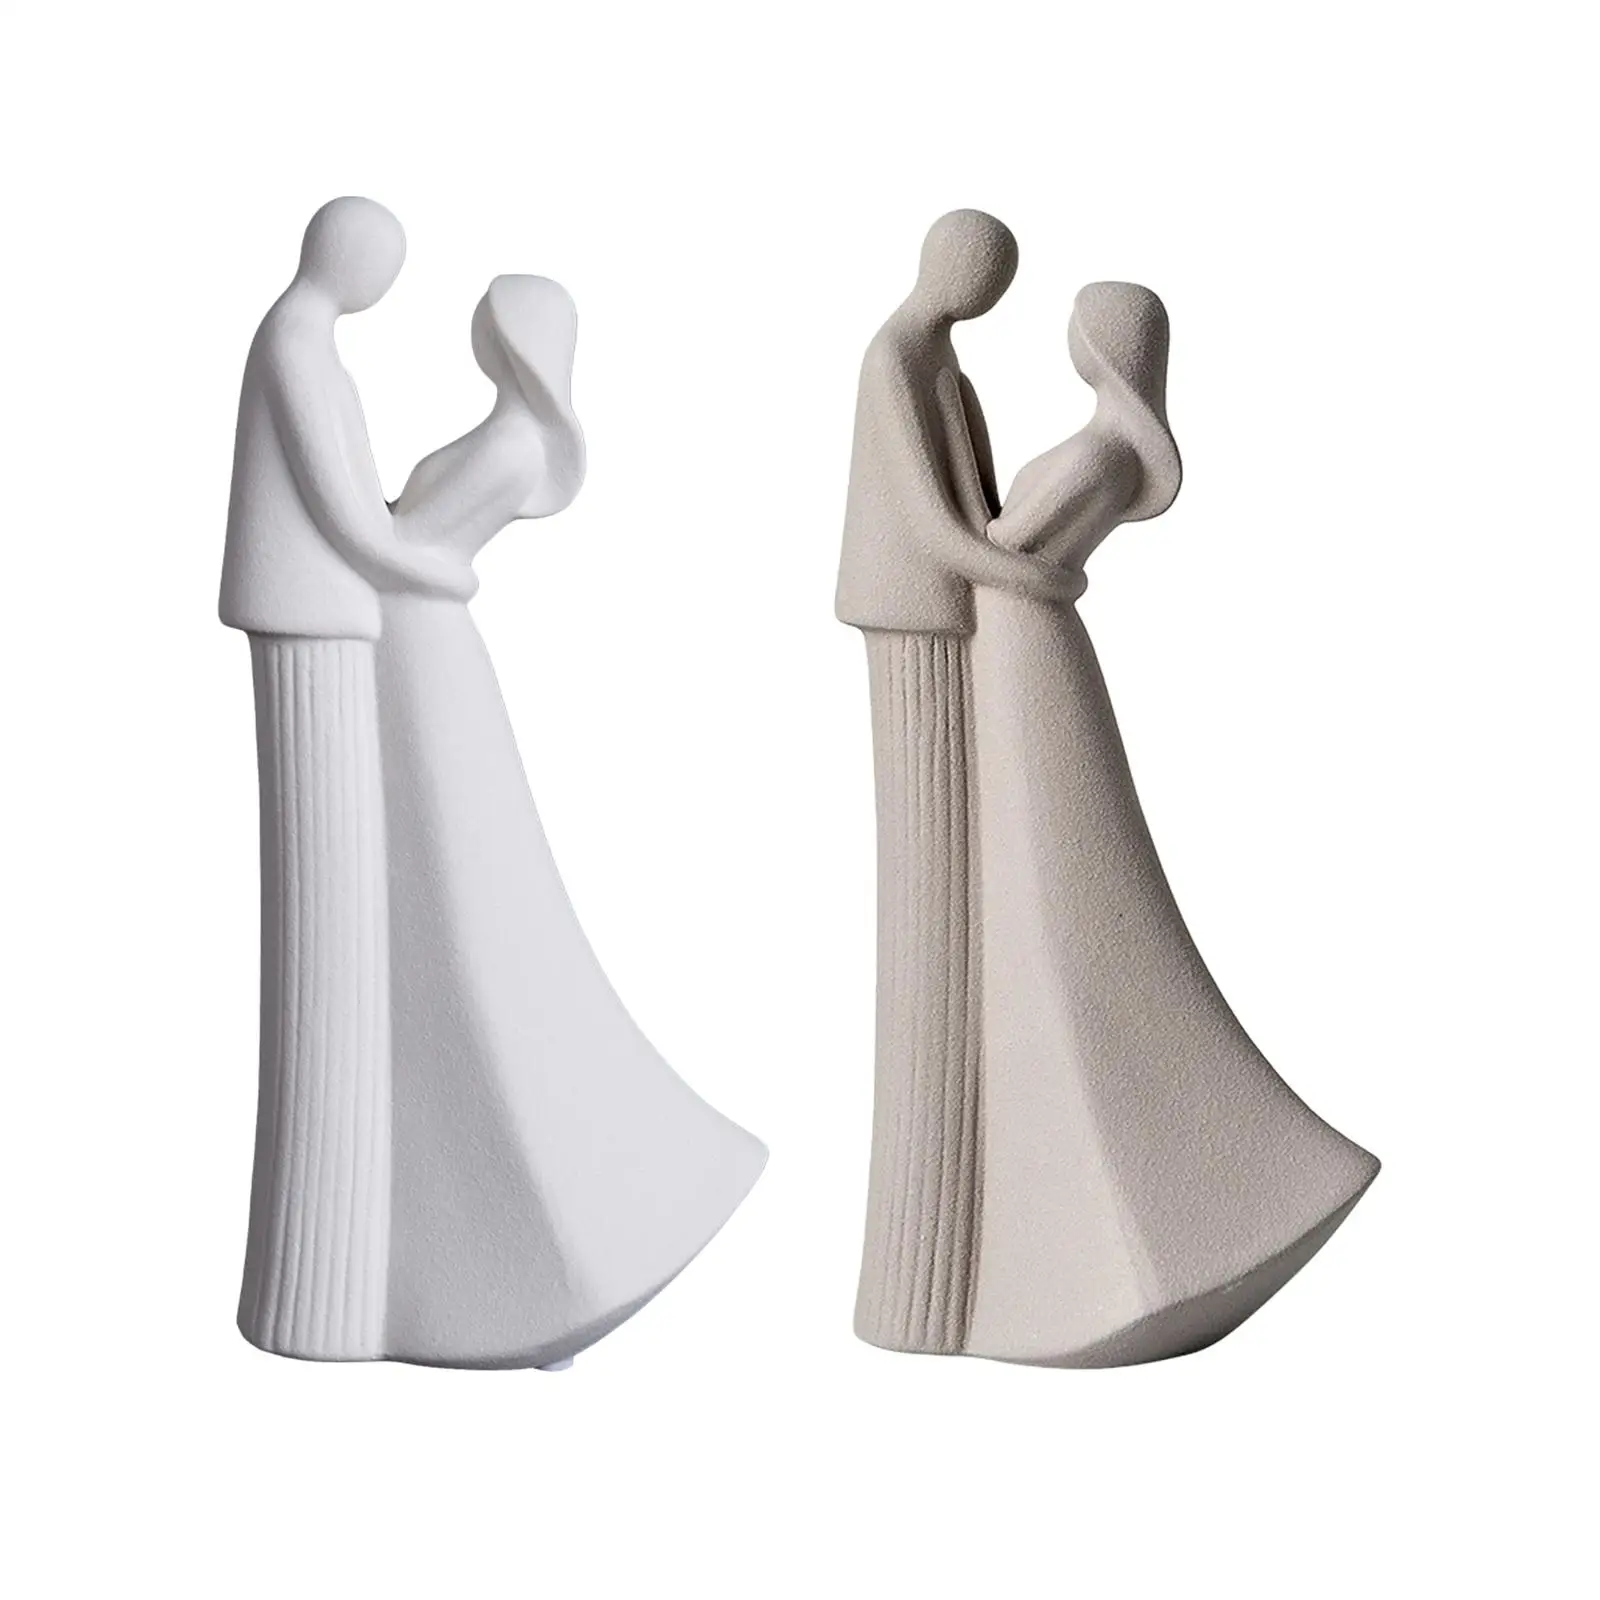 Creative Couple Statue Lover Figurine Collectible Craft Art Sculpture for Desktop Party Bar Home Decoration Bedroom